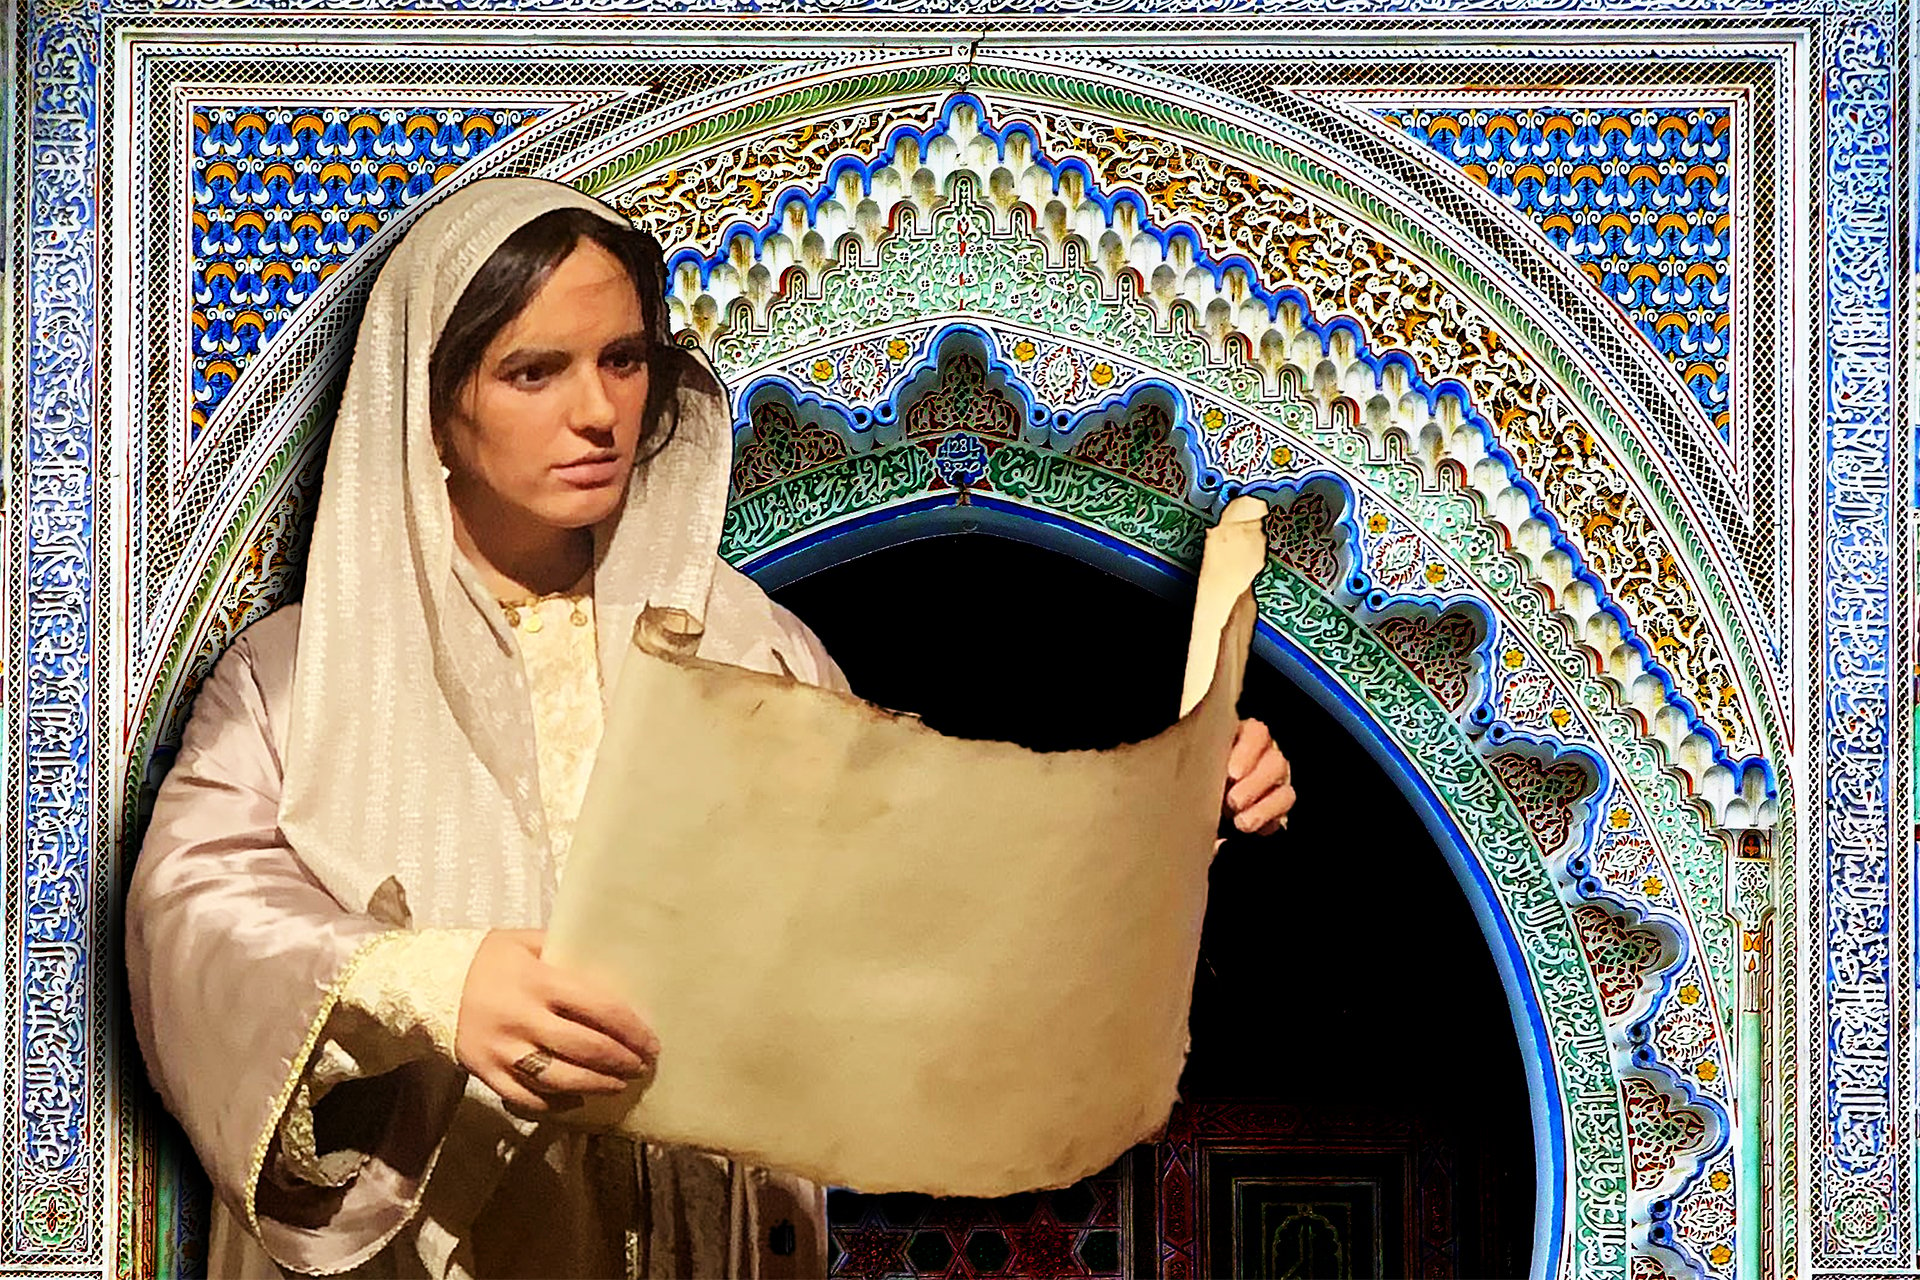 A museum exhibit of a Fatima Al-Fihri mannequin in a white robe holding a parchment scroll in front of a blue and white tiled archway.